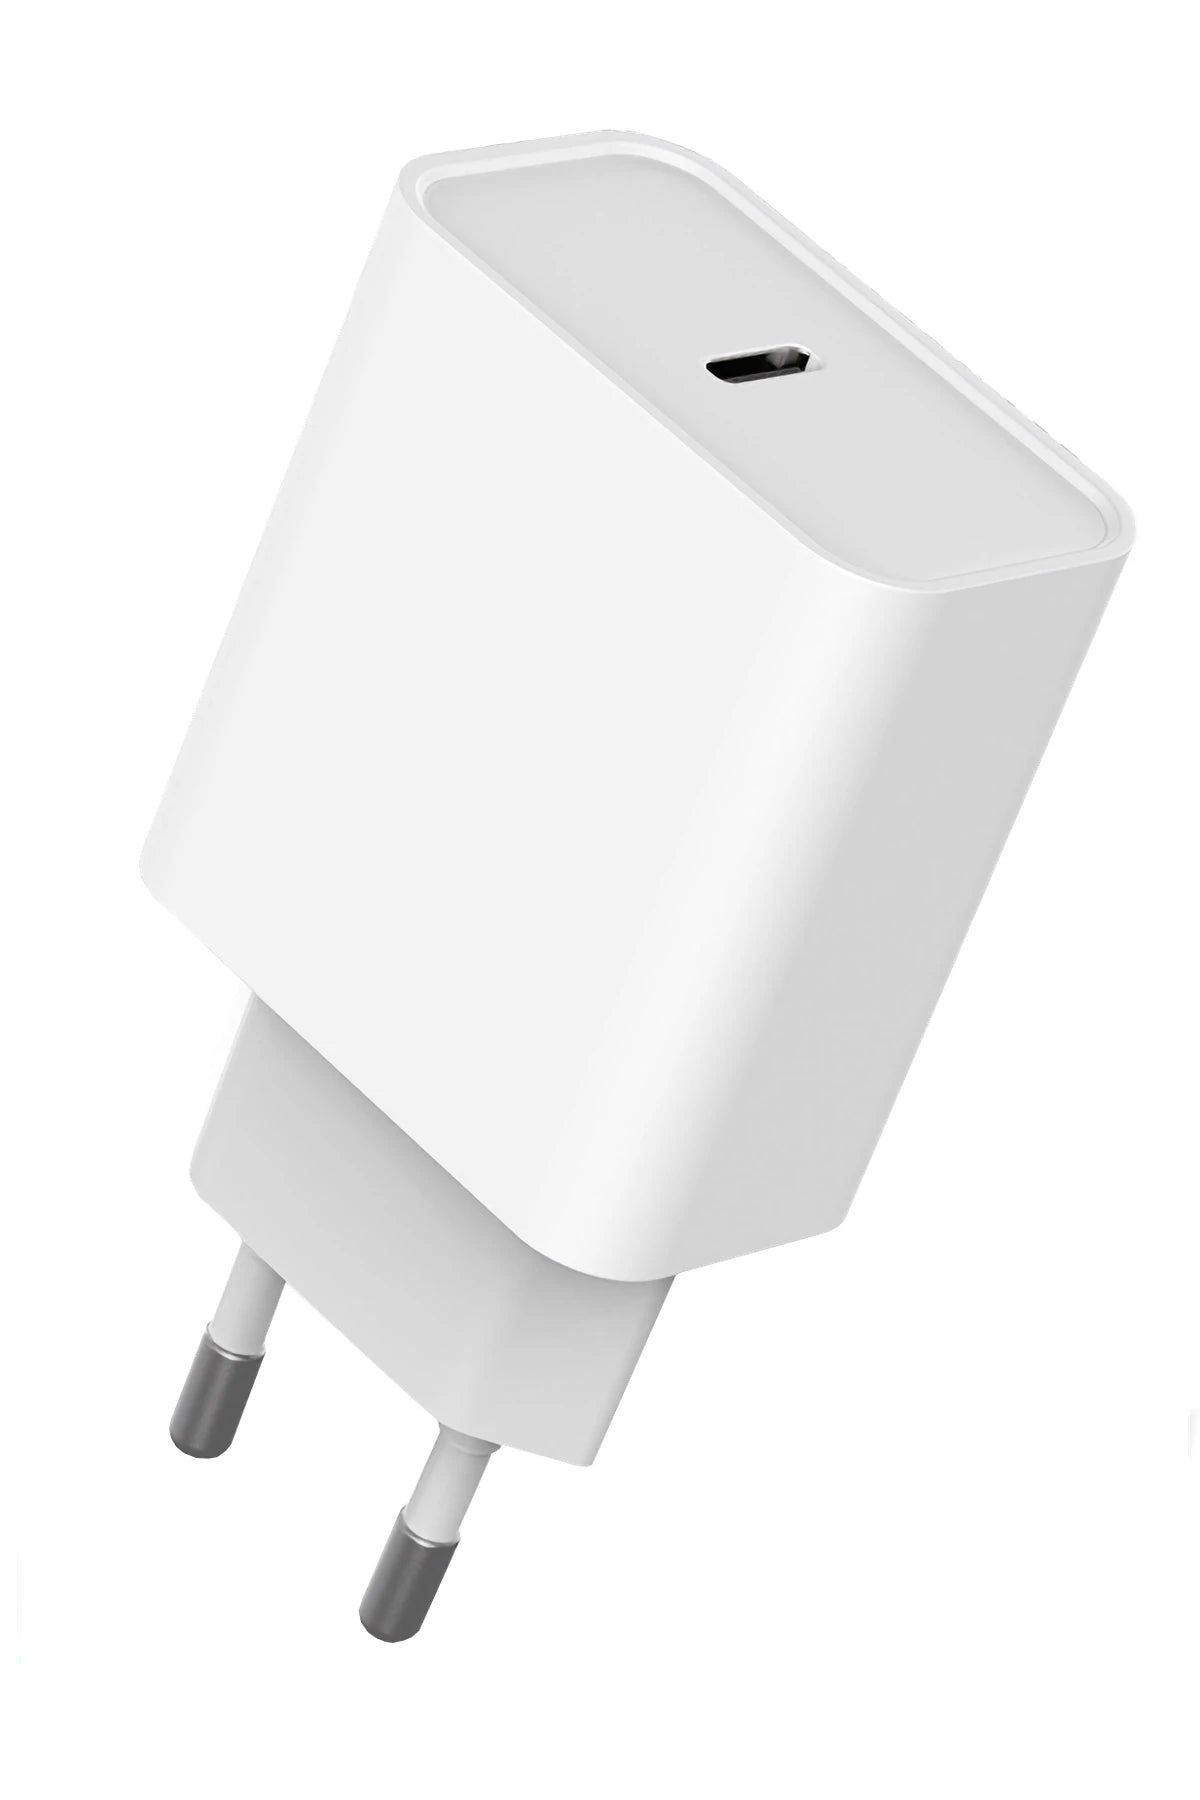 Wiwu Comet 20w Fast Charger with USB-C PD Support 